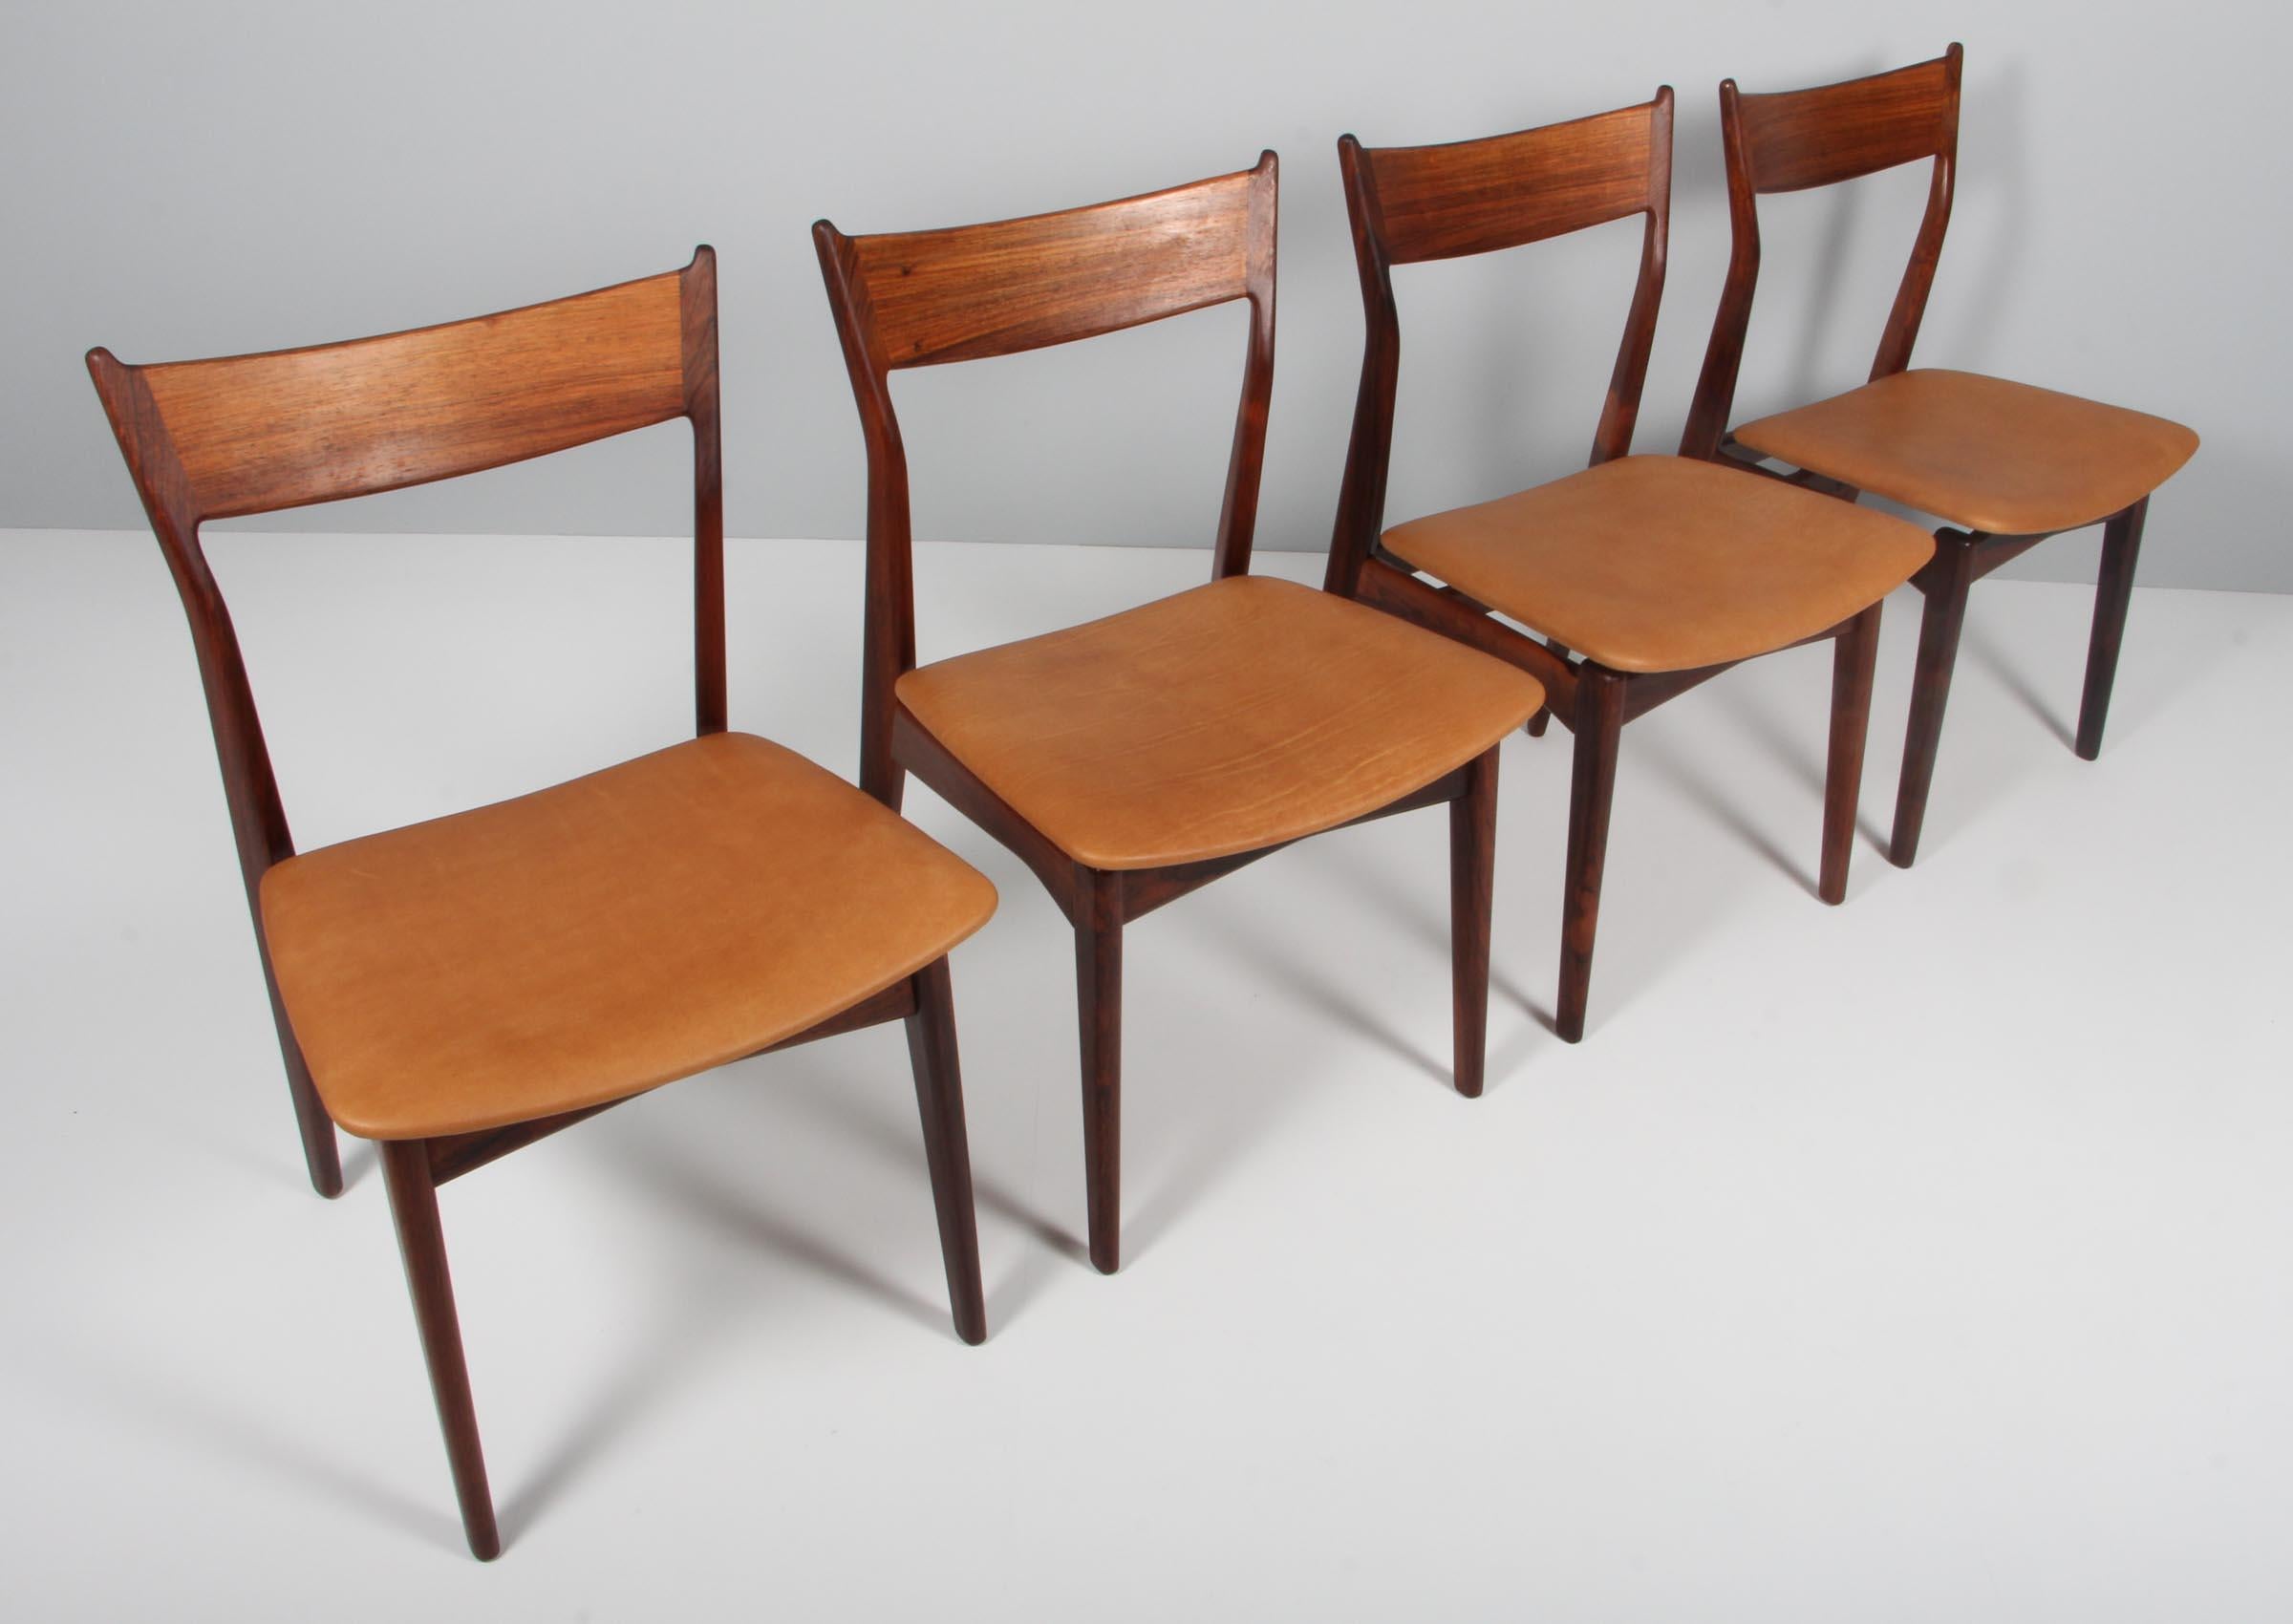 HP Hansen set of four dining chairs new upholstered with aniline leather.

Made in partly solid rosewood.

Made by HP Hansen in Denmark in the 1960s.